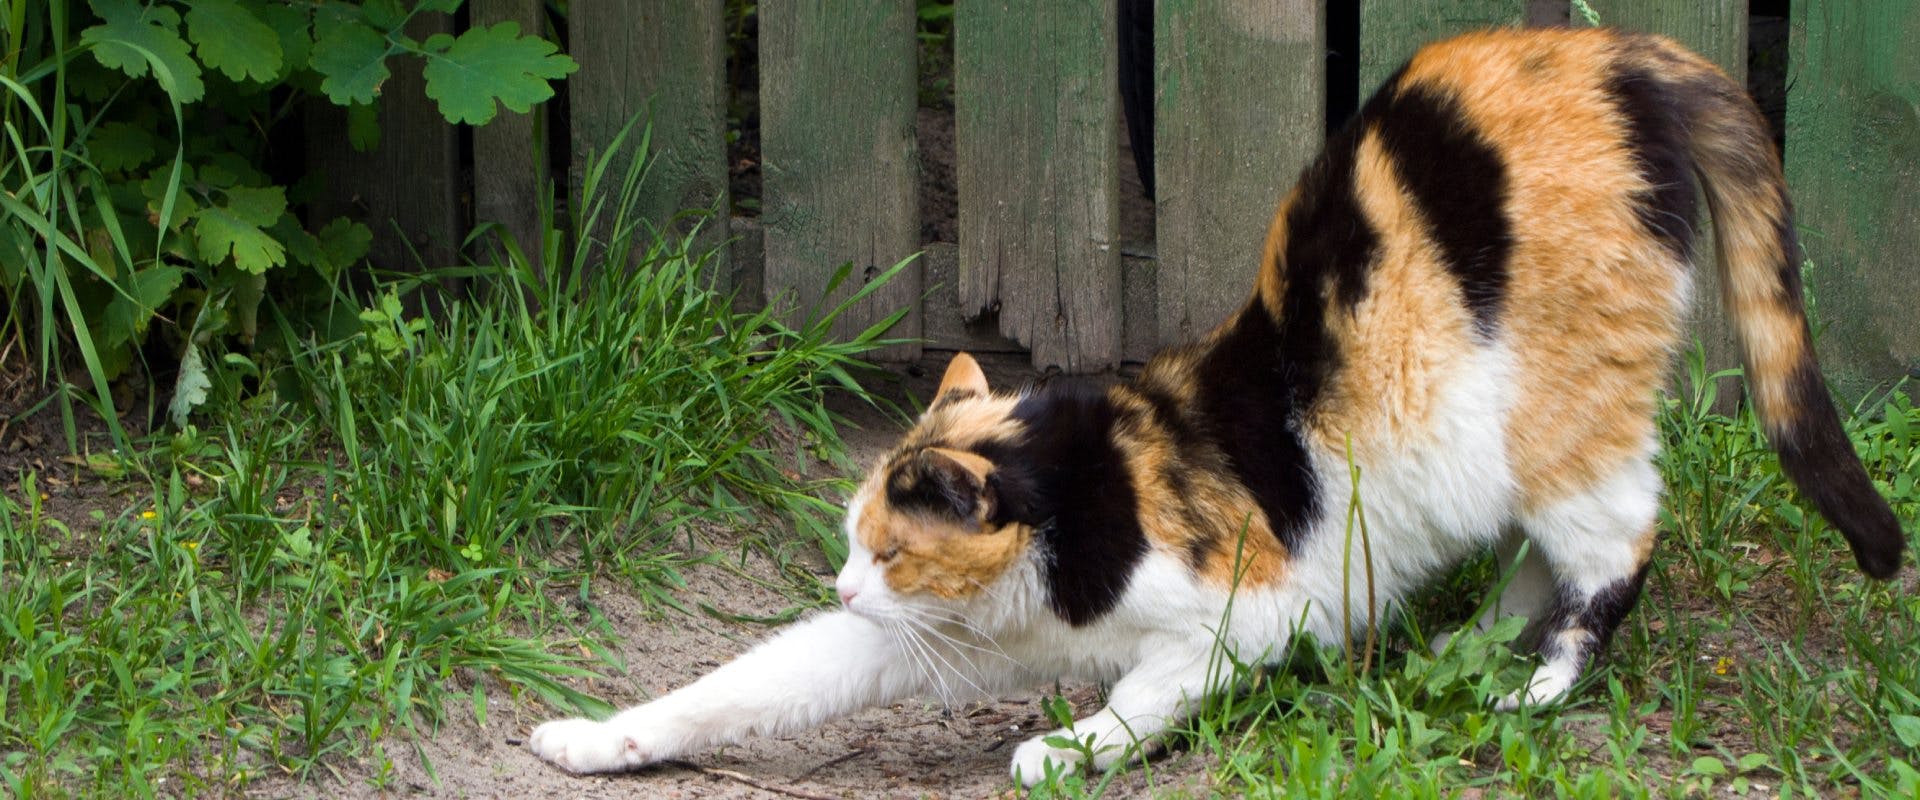 Cat in garden stretching and forming the lordosis cat arch pose.